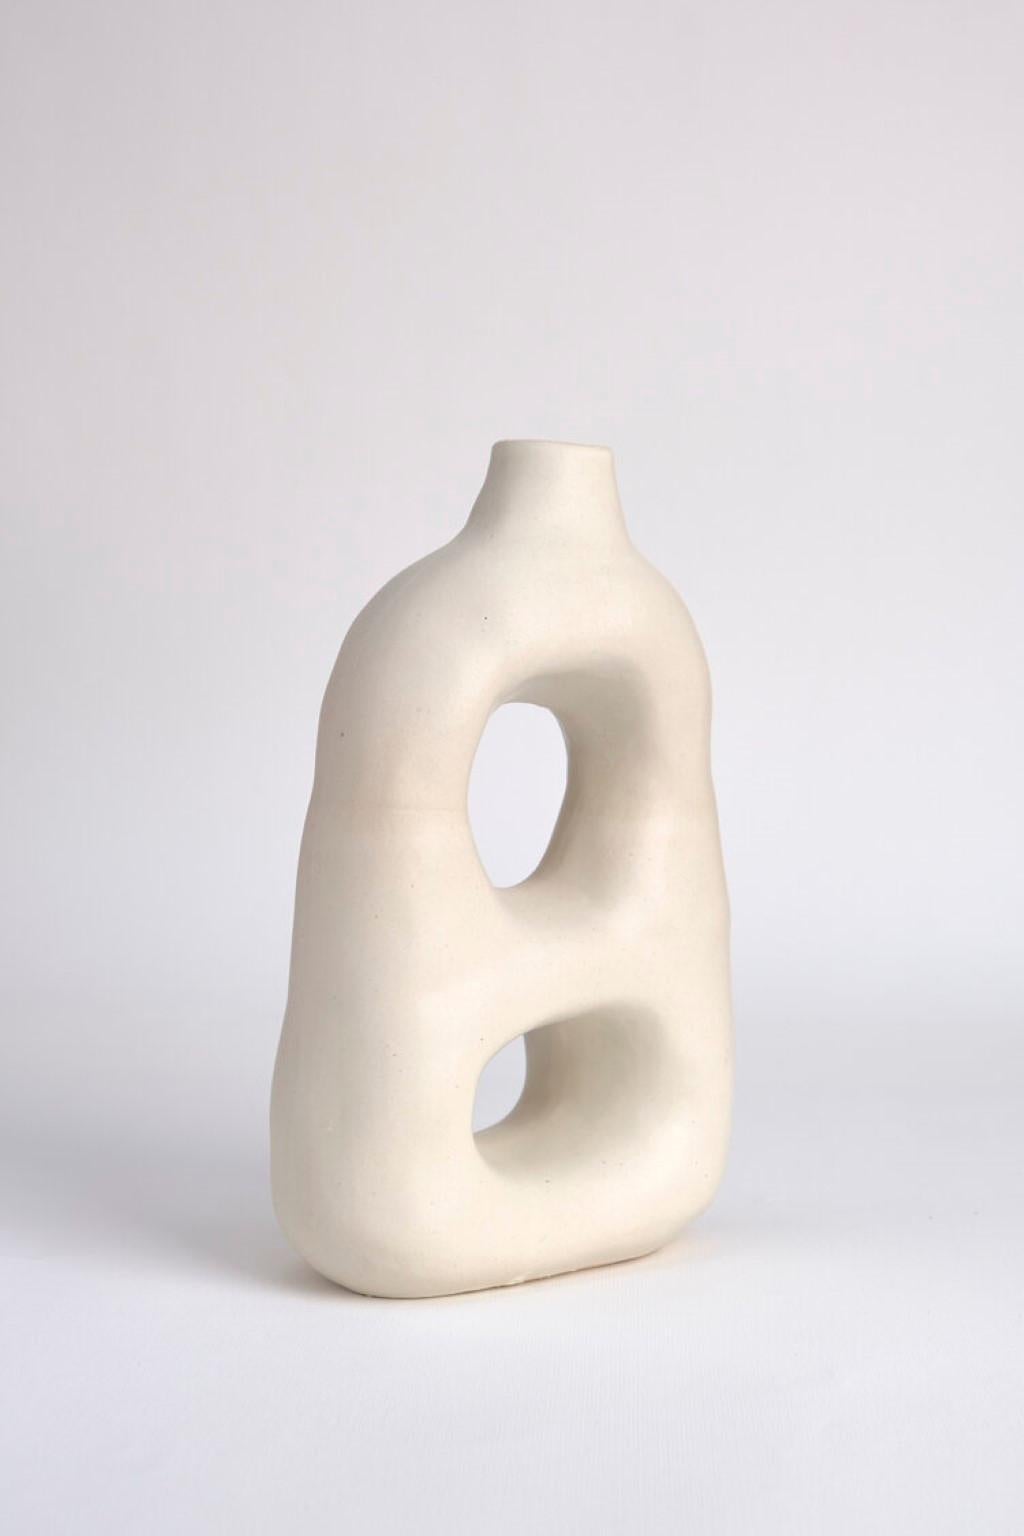 Unique Torso Stoneware vase by Camila Apaez
Unique 
Materials: Stoneware
Dimensions: 7 x 8 x 25 cm
Options: White bone, Chocolate, Buttermilk, Charcoal Black, Glossy, Spotted Gray, Pale Opal, Nube, Glossy.

This year has been shaped by the